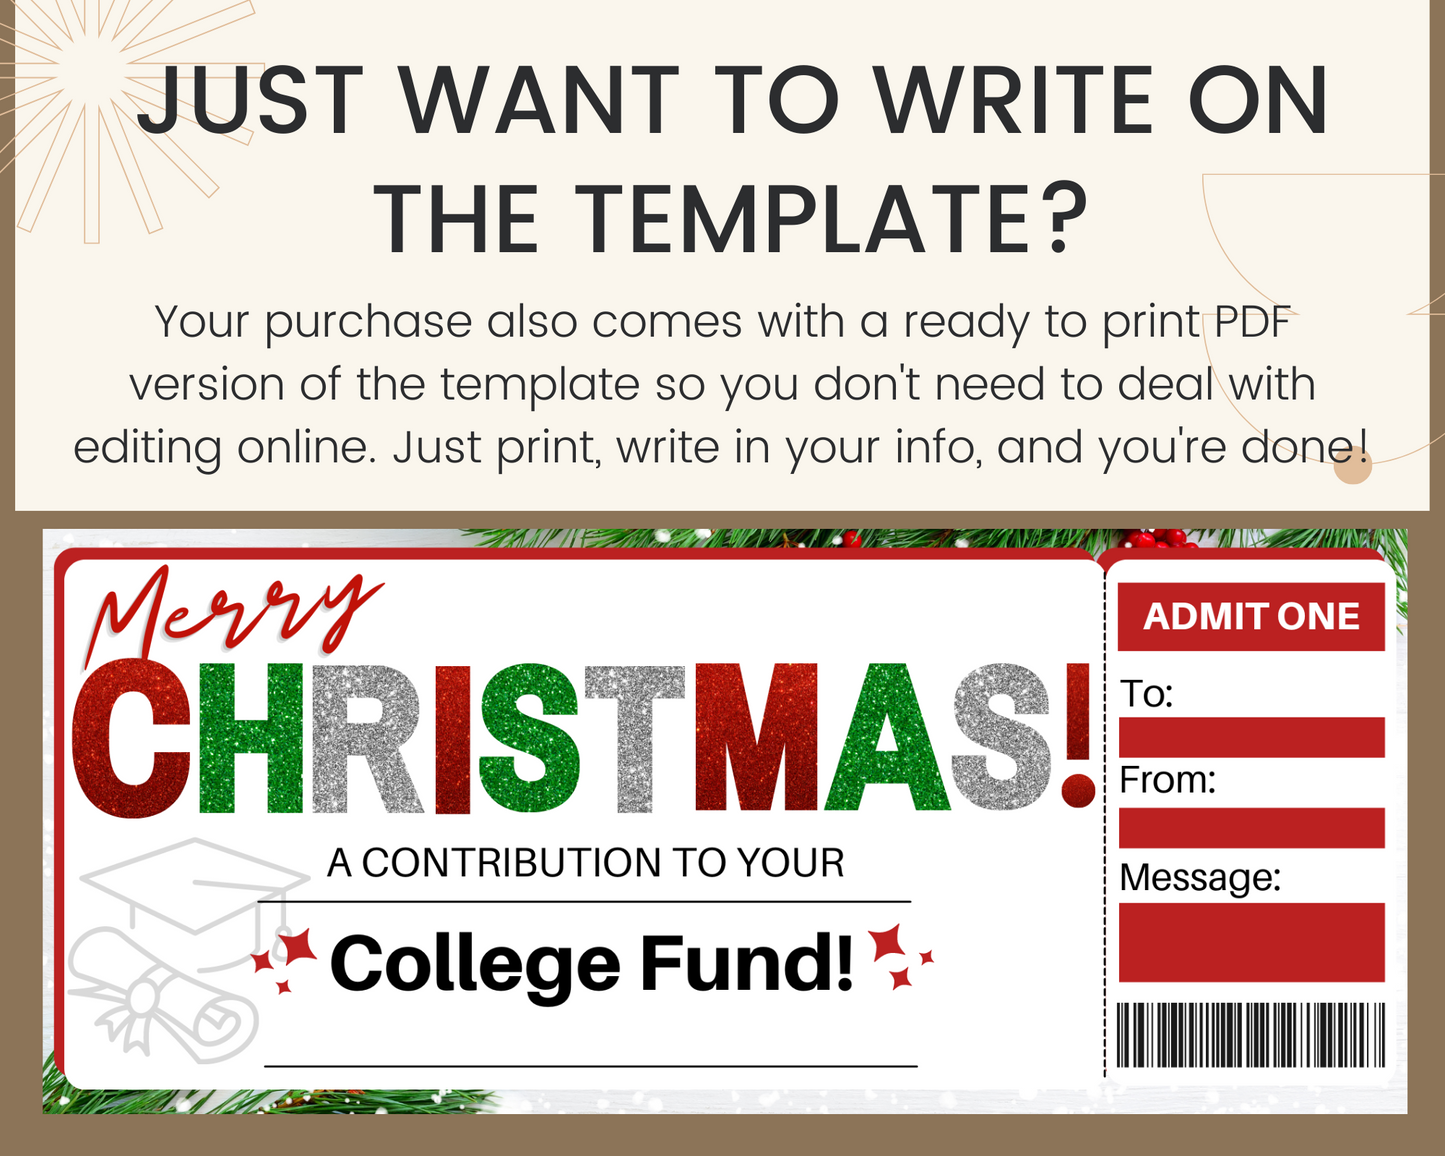 Christmas College Tuition Gift Ticket